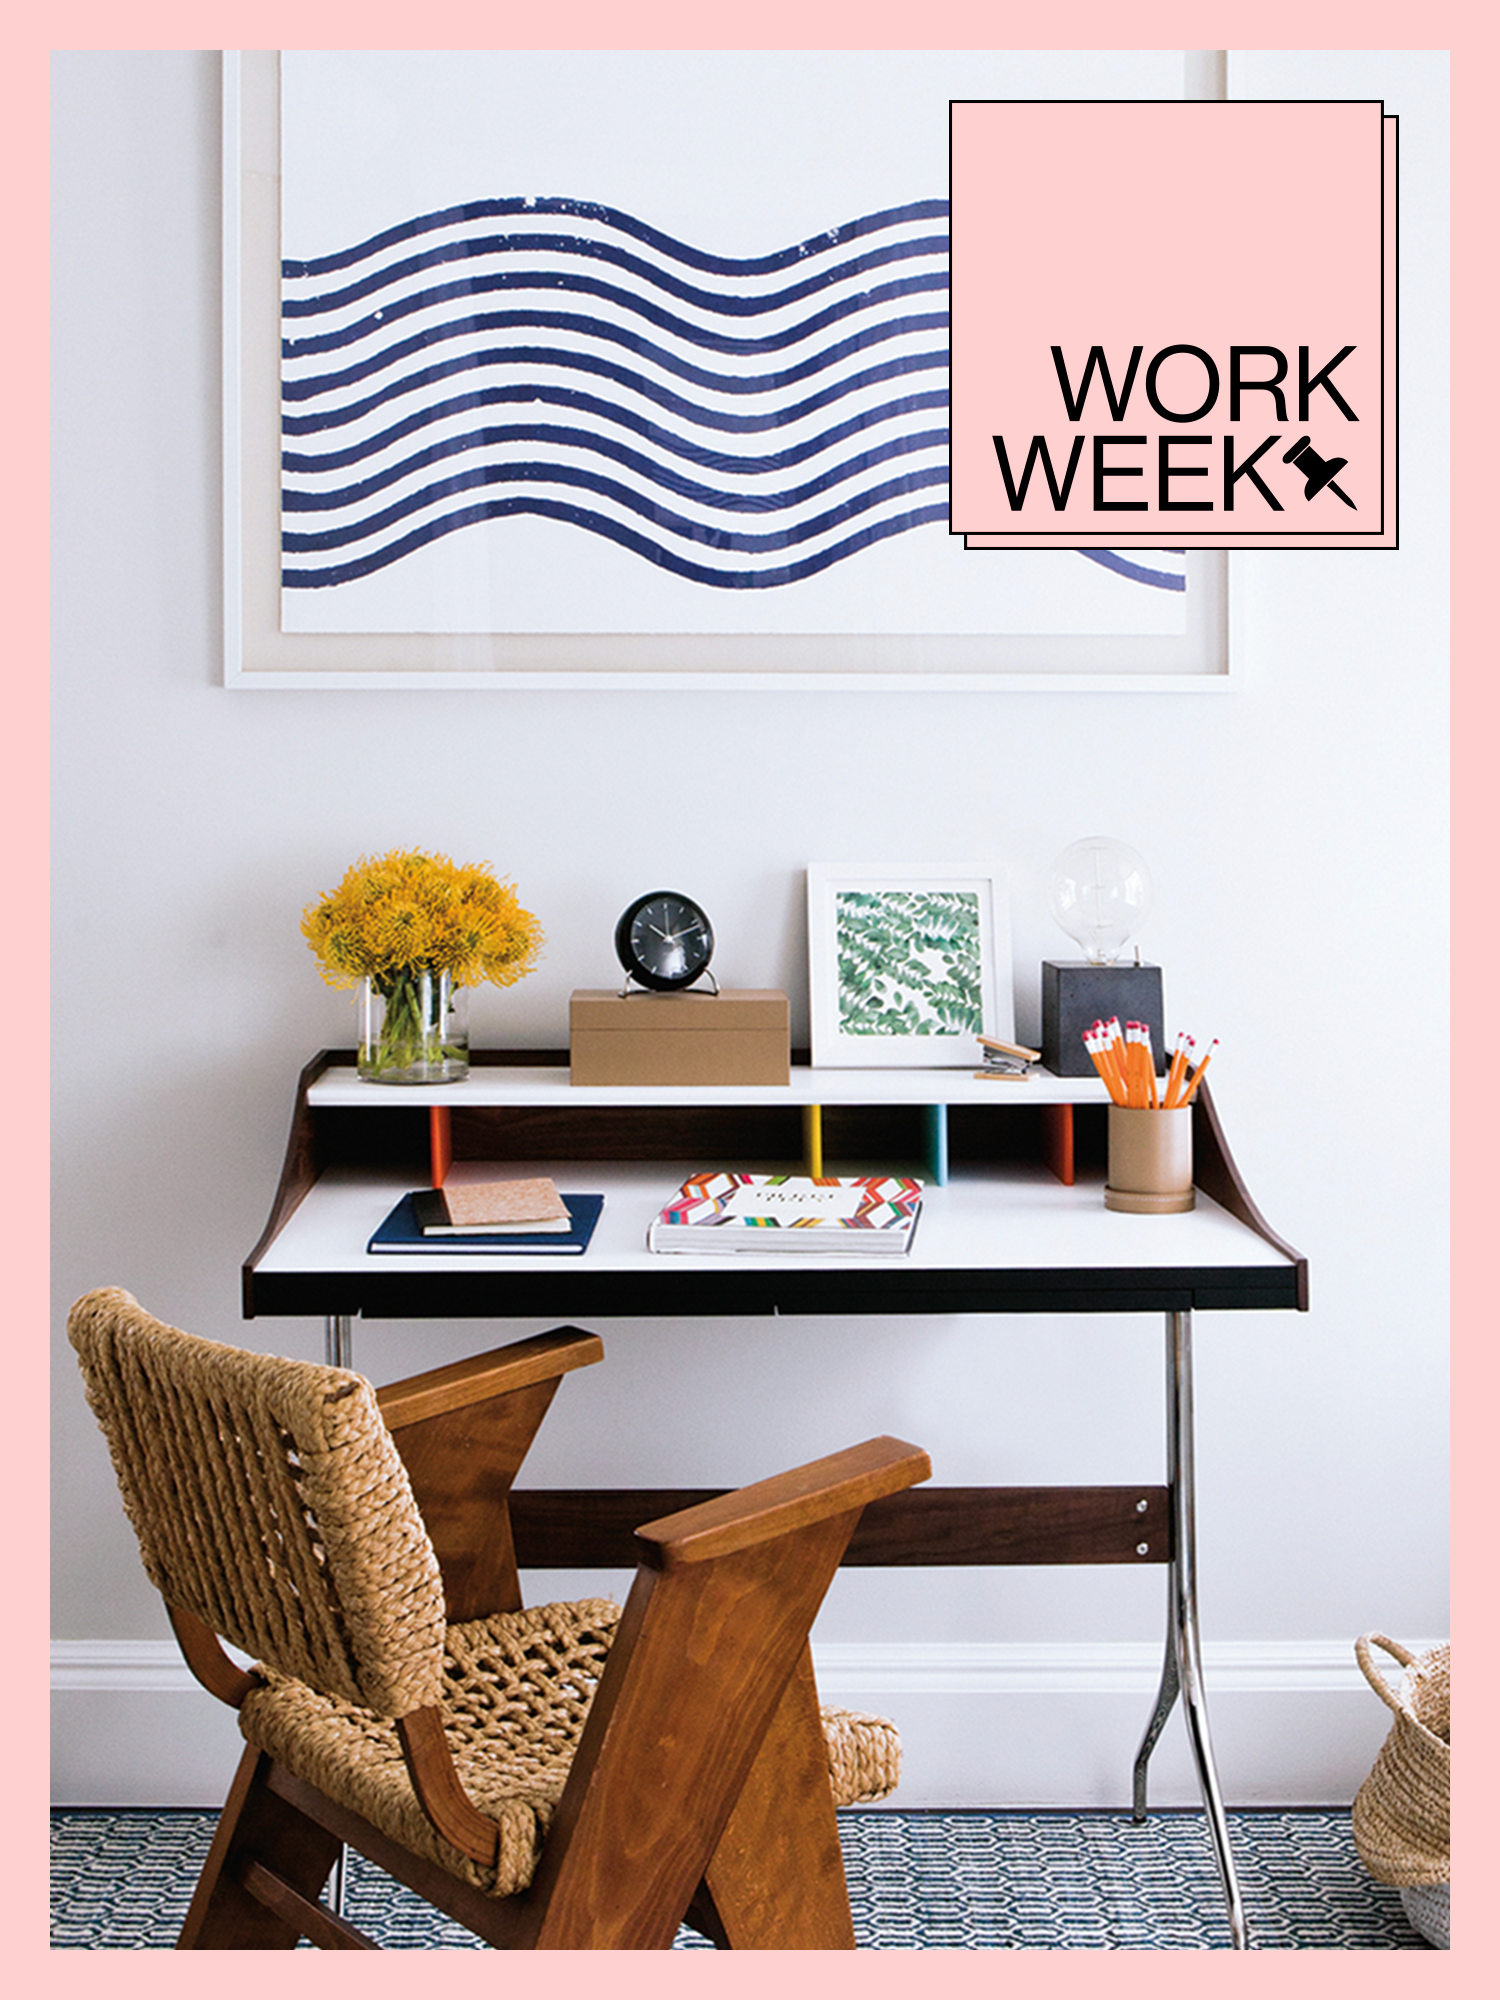 Small-space desk with blue wavy artwork above it and a woven wooden chair beside it.